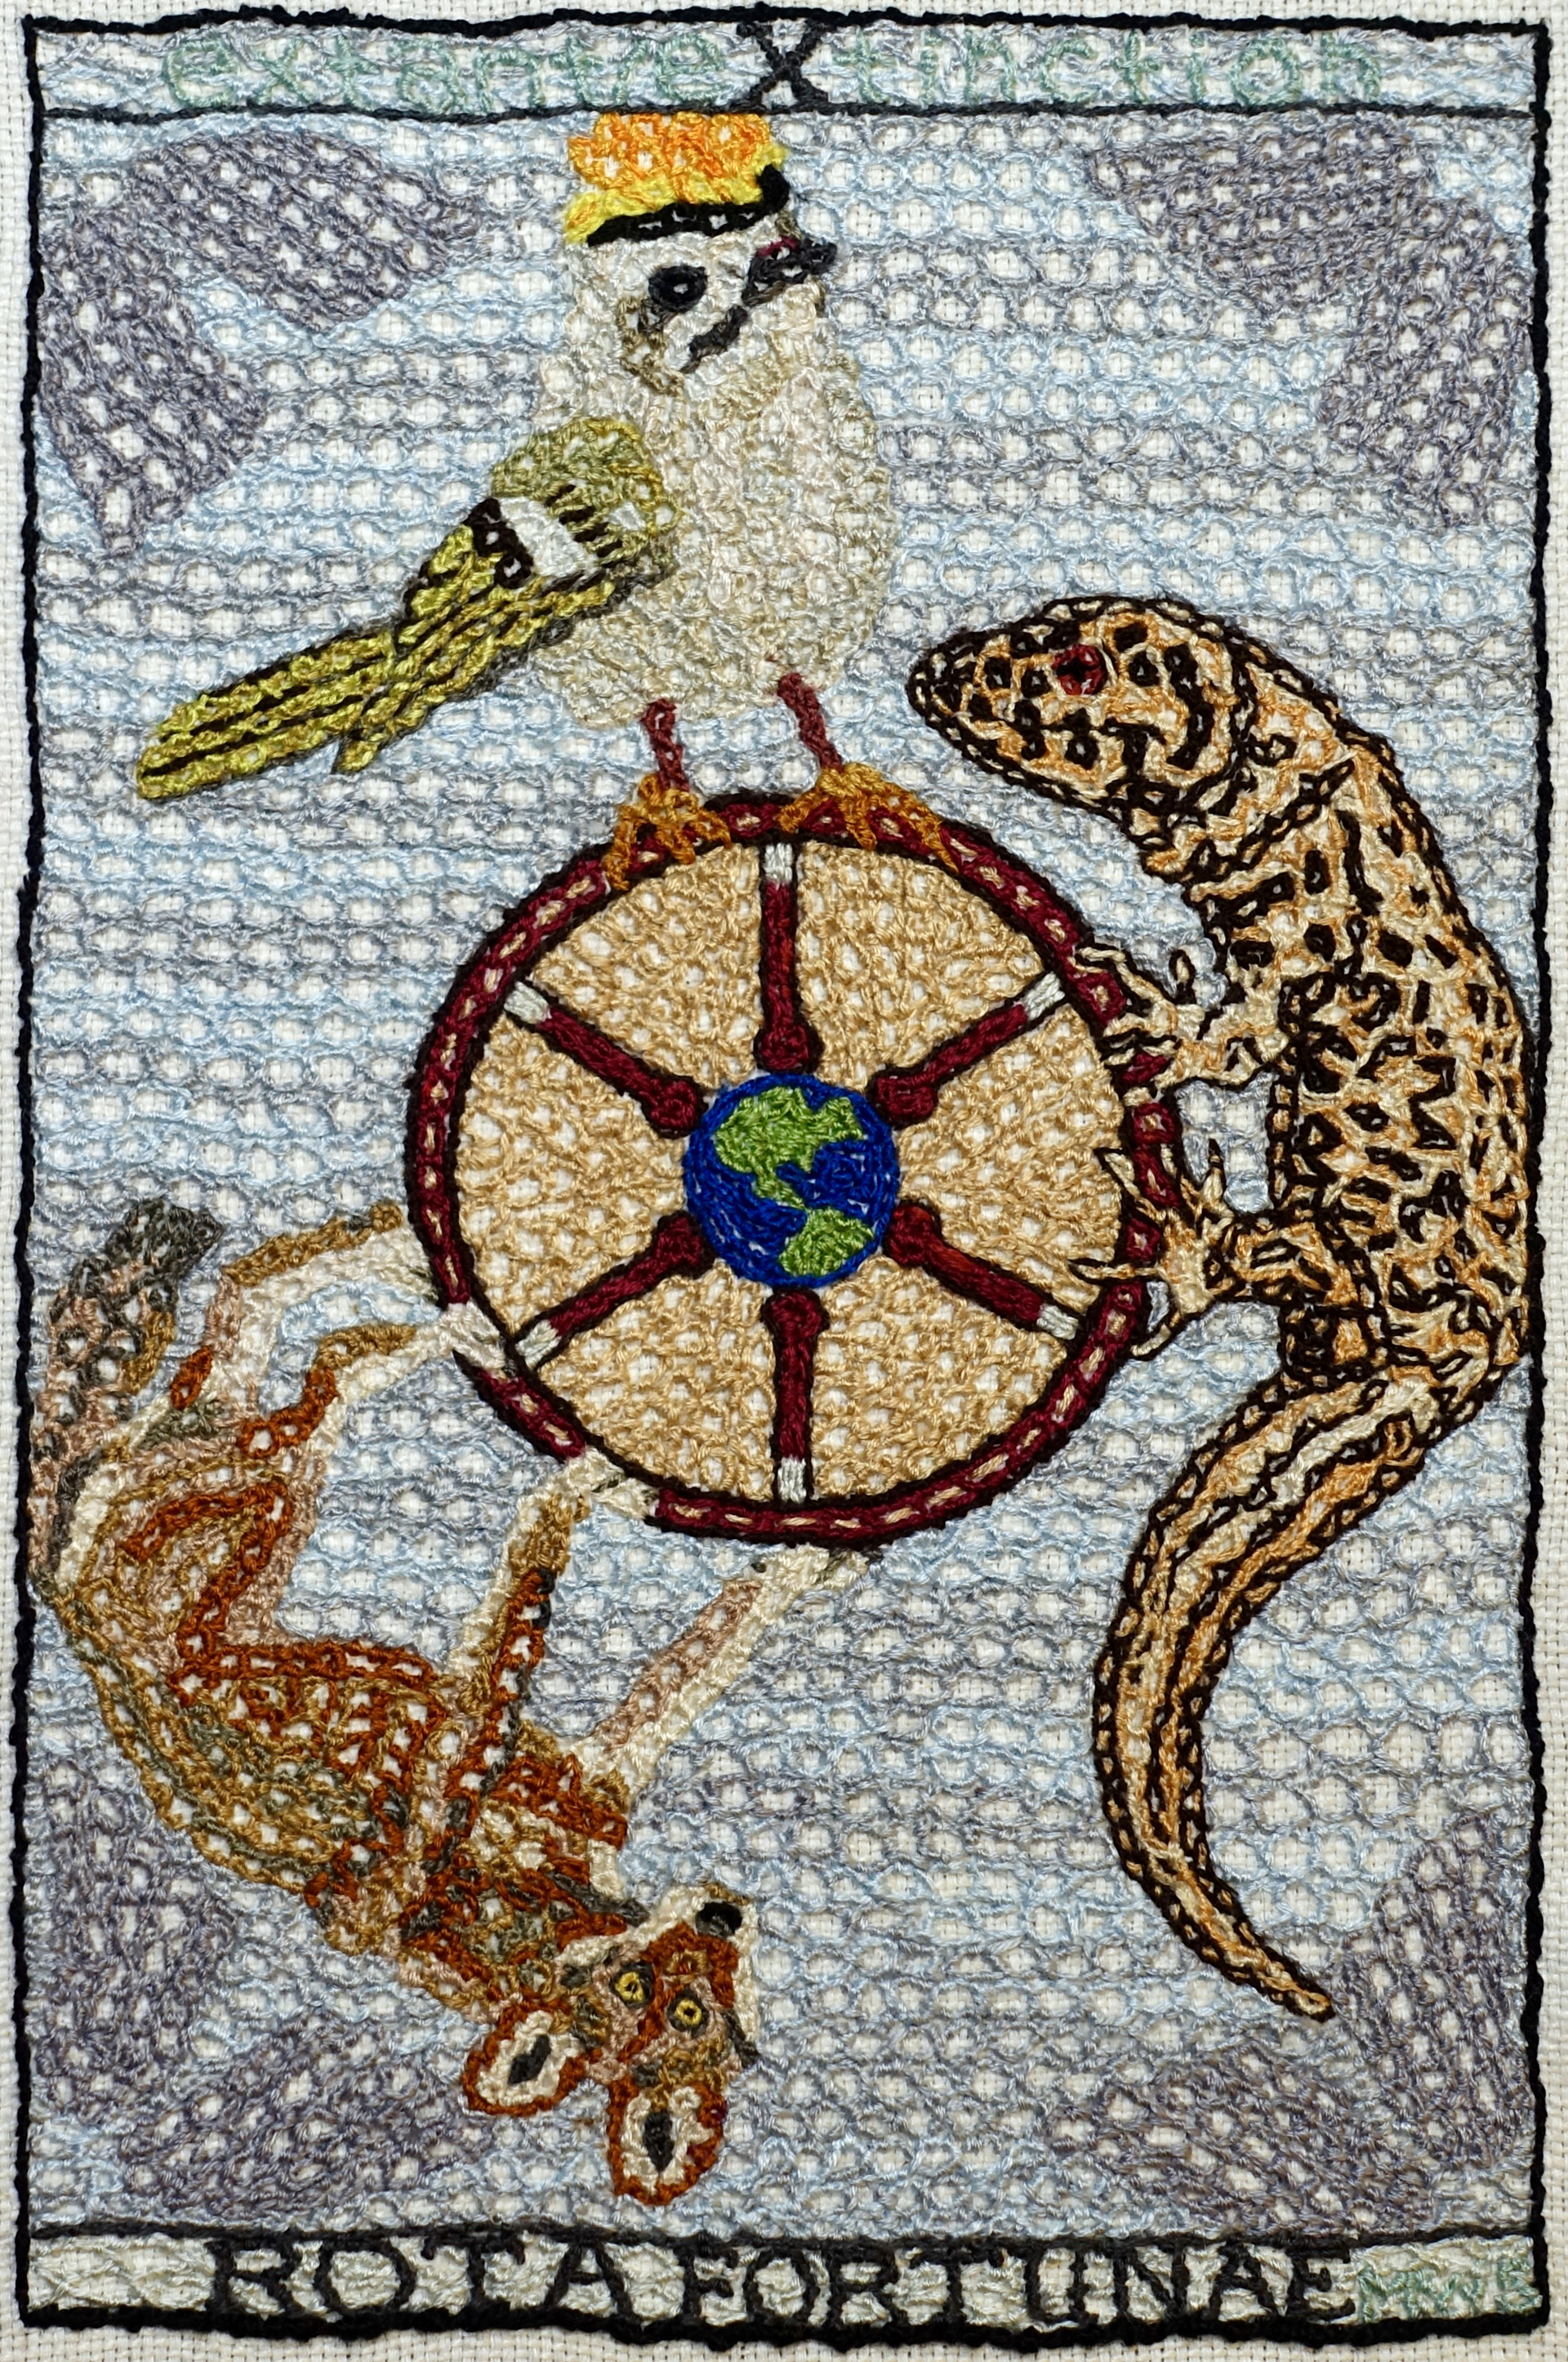 "Rota Fortunae: Extant/Extinction" by Martha Shade is a "stitch-work painting" depicting the 6th extinction, interpreted as the Wheel of Fortune tarot card